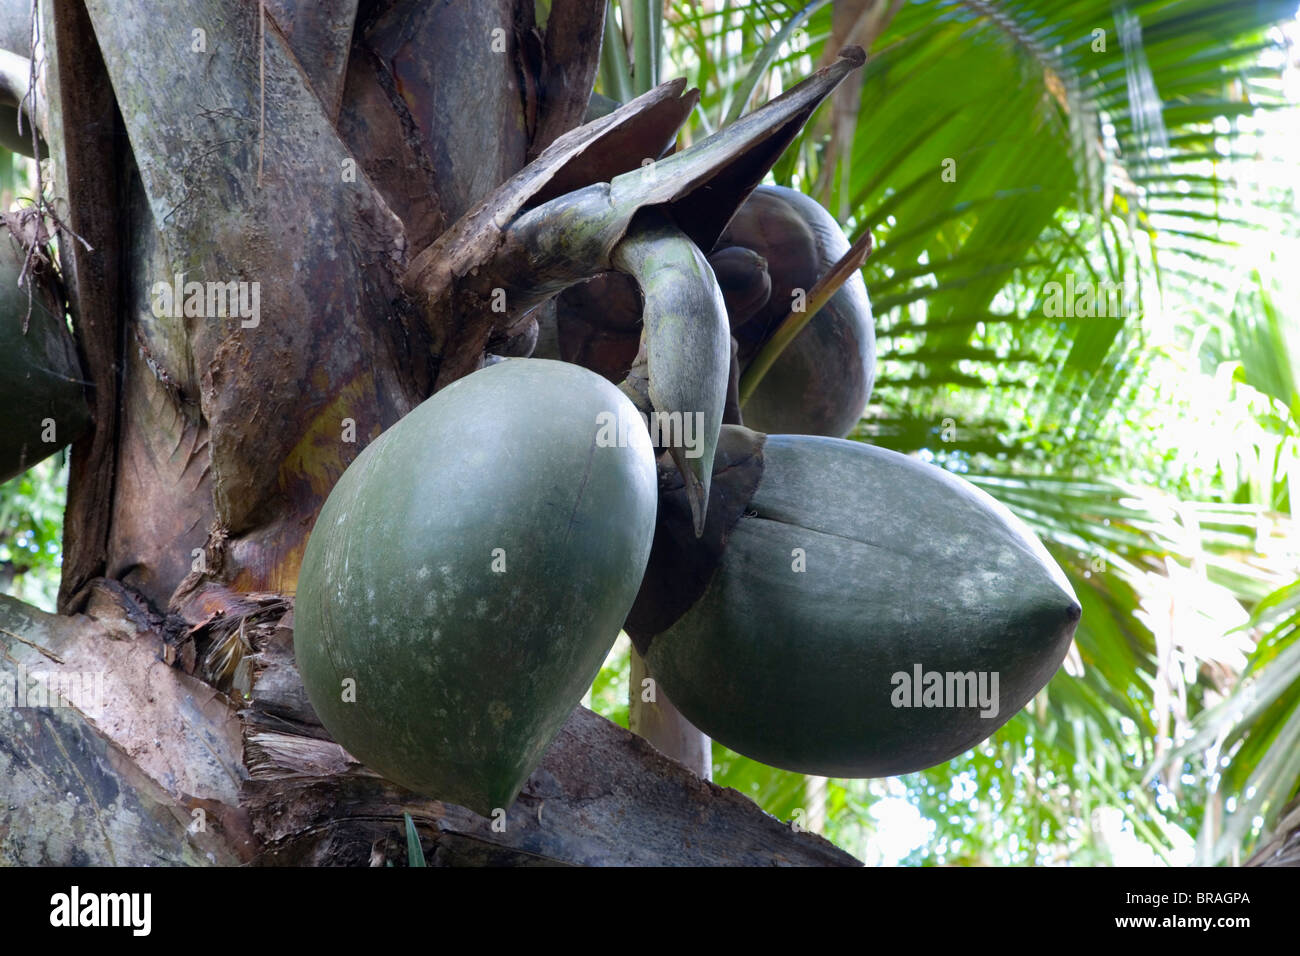 Giant fruit of coco de mer palm in the Vallee de Mai Nature Reserve, Baie Sainte Anne district, Island of Praslin, Seychelles Stock Photo